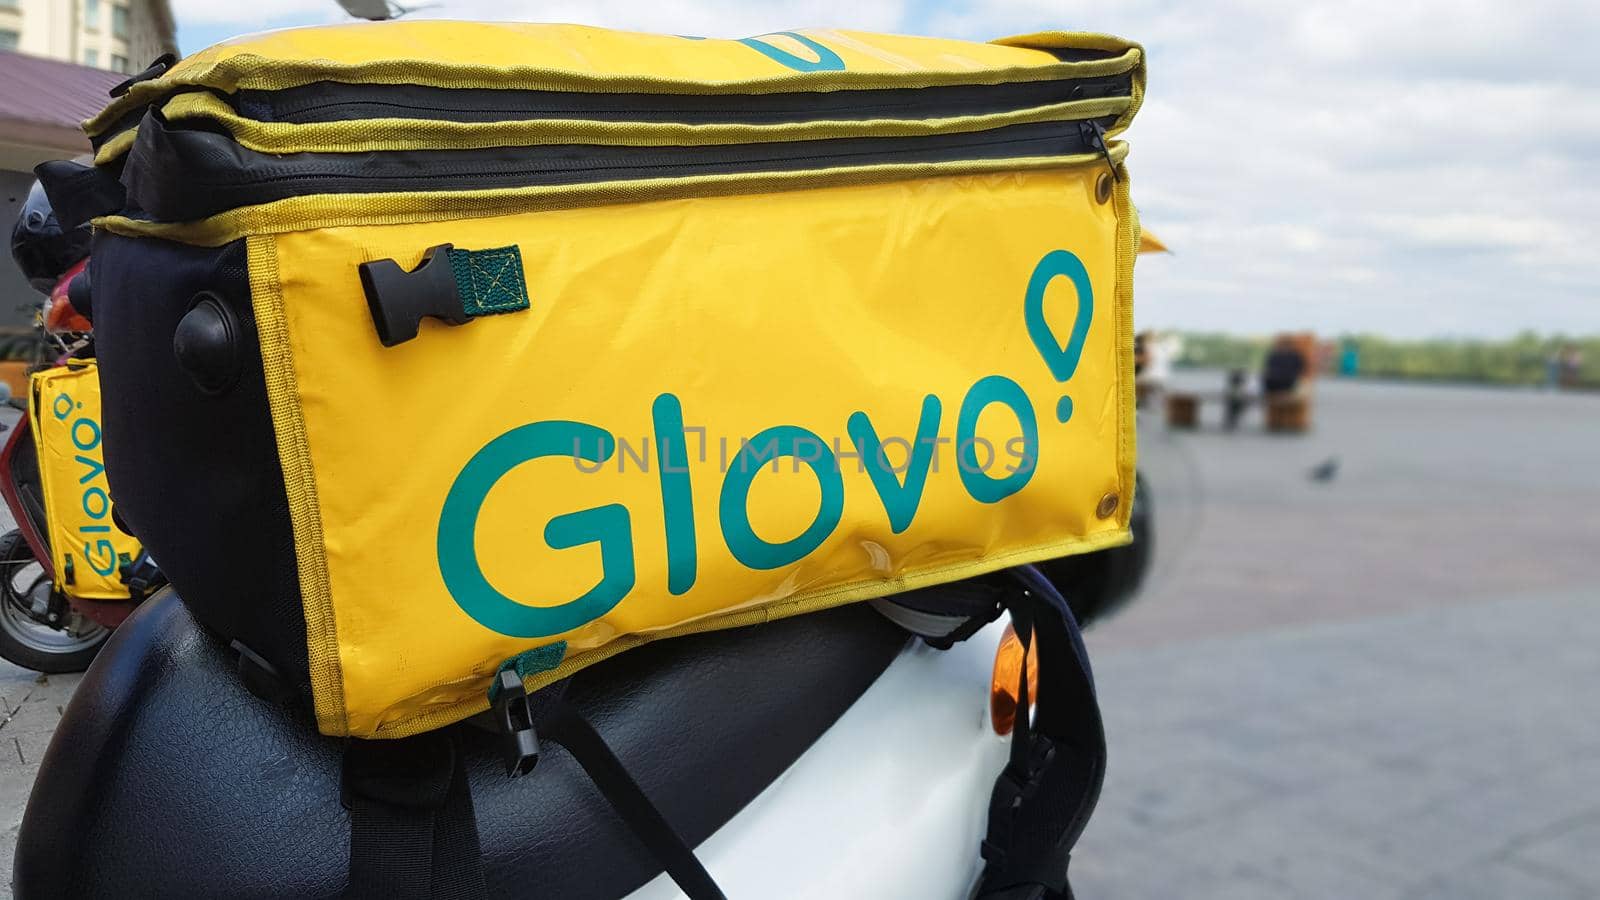 Ukraine, Kiev - August 29, 2020. Parked moped with yellow bag with Glovo logo near McDonald's close-up. Courier service that delivers goods ordered through a mobile application. Editorial photography. by Roshchyn